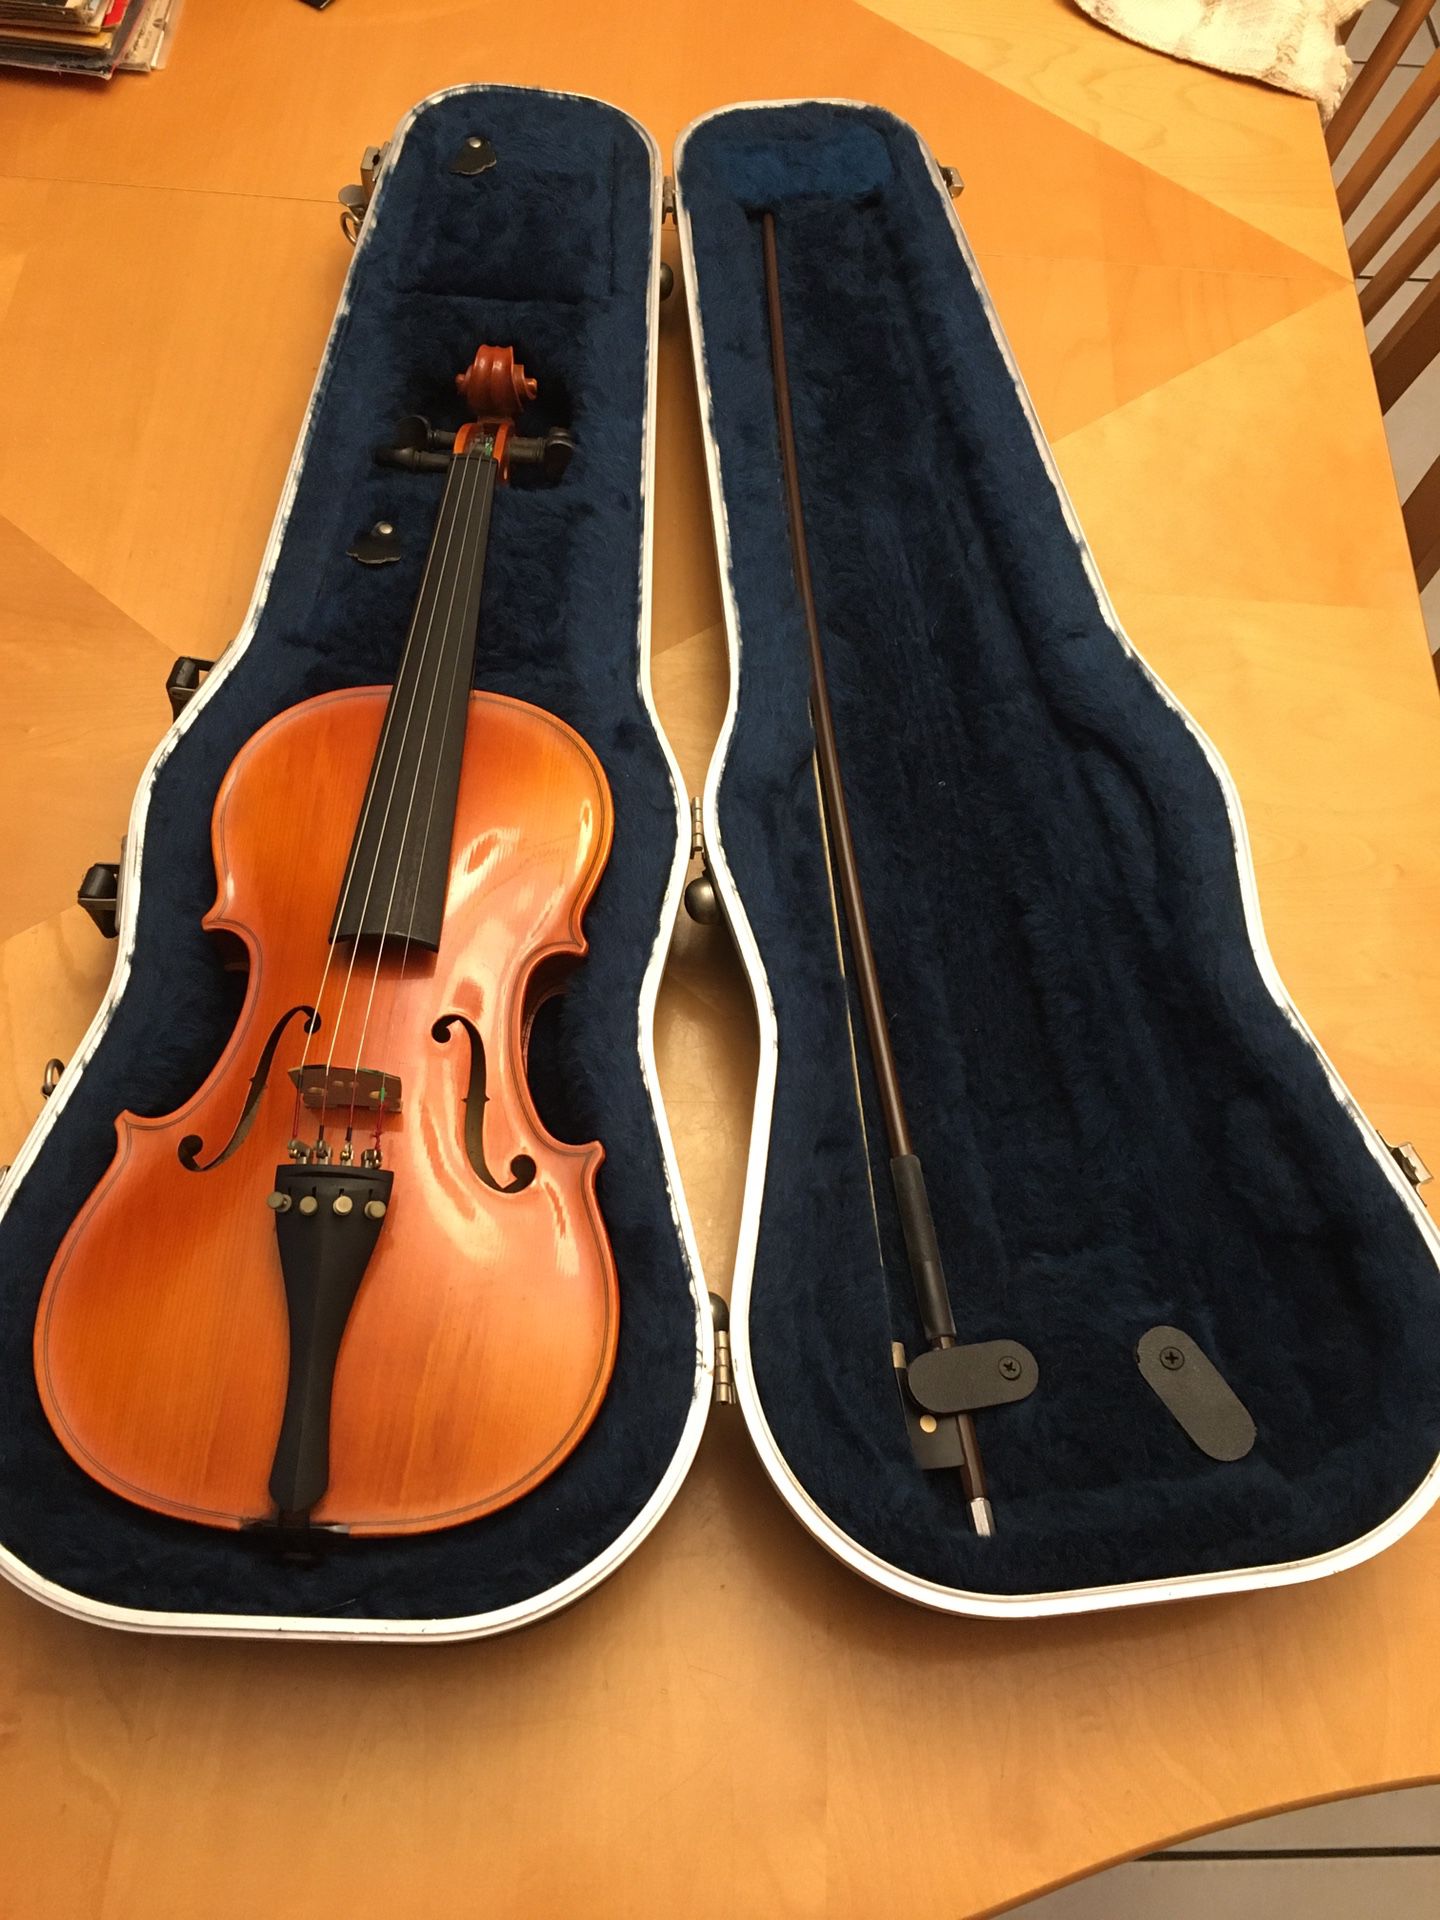 Strunal Violin MINT Condition Czech Republic Made Violin by Strunal 4/4 size (TRADE????) seasoned woods w/ ebony fittings. Comes with Hard Case, Bow &